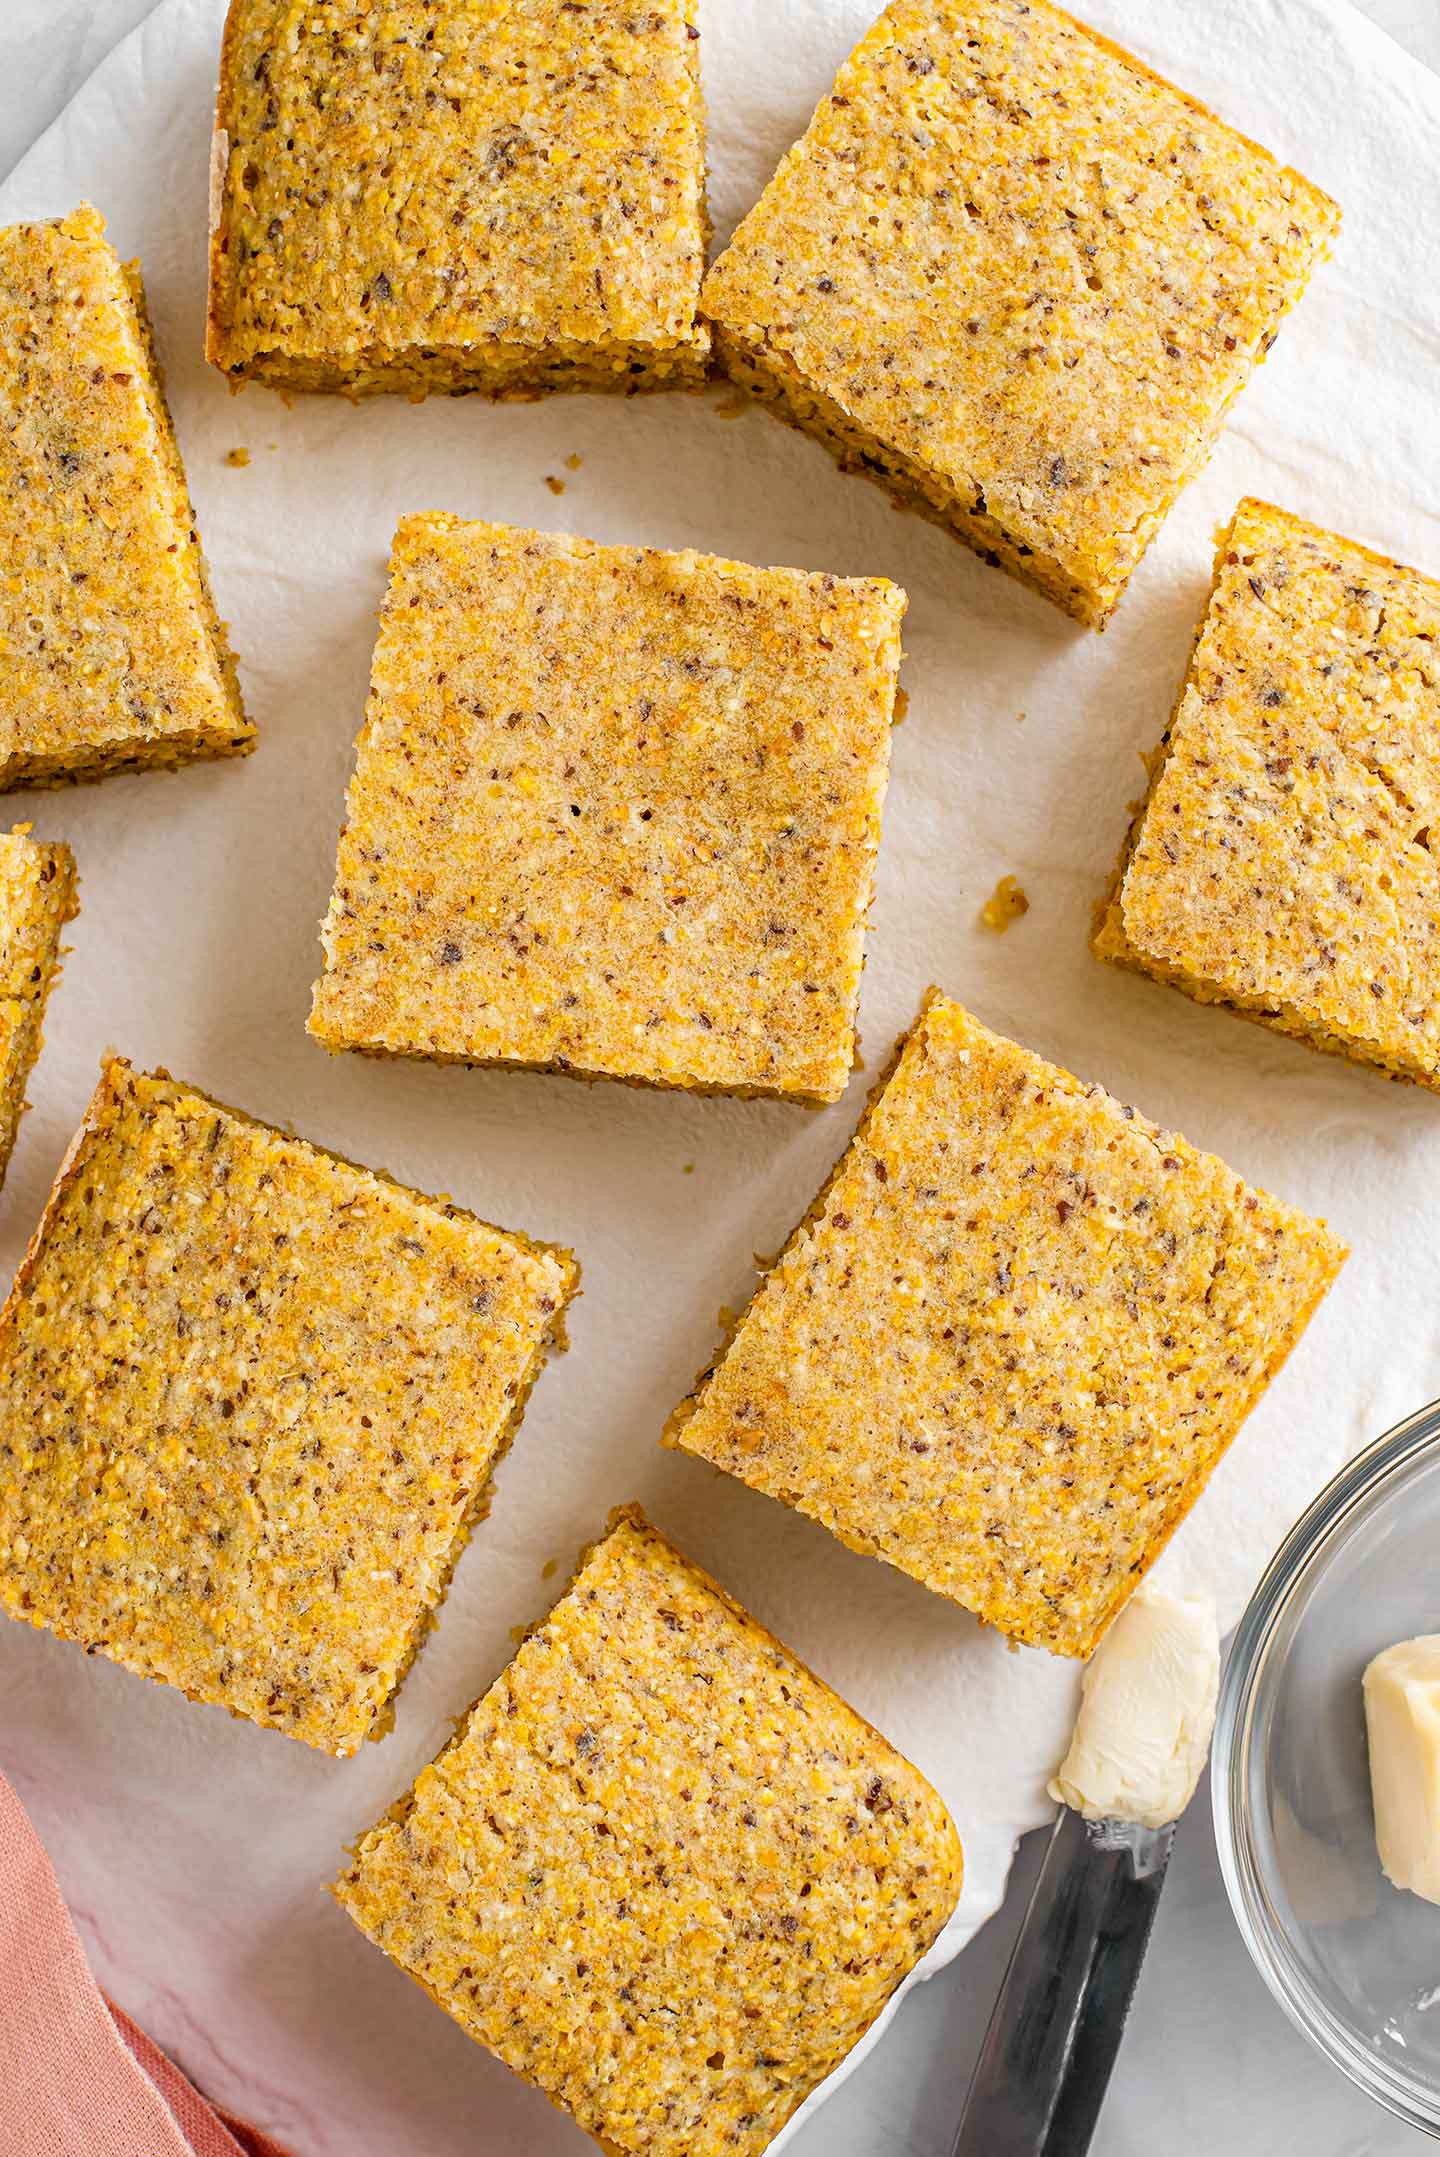 Top down view of kid approved cornbread sliced into squares on a white tray. The cornbread is golden, speckled, fluffy and crispy around the edges.